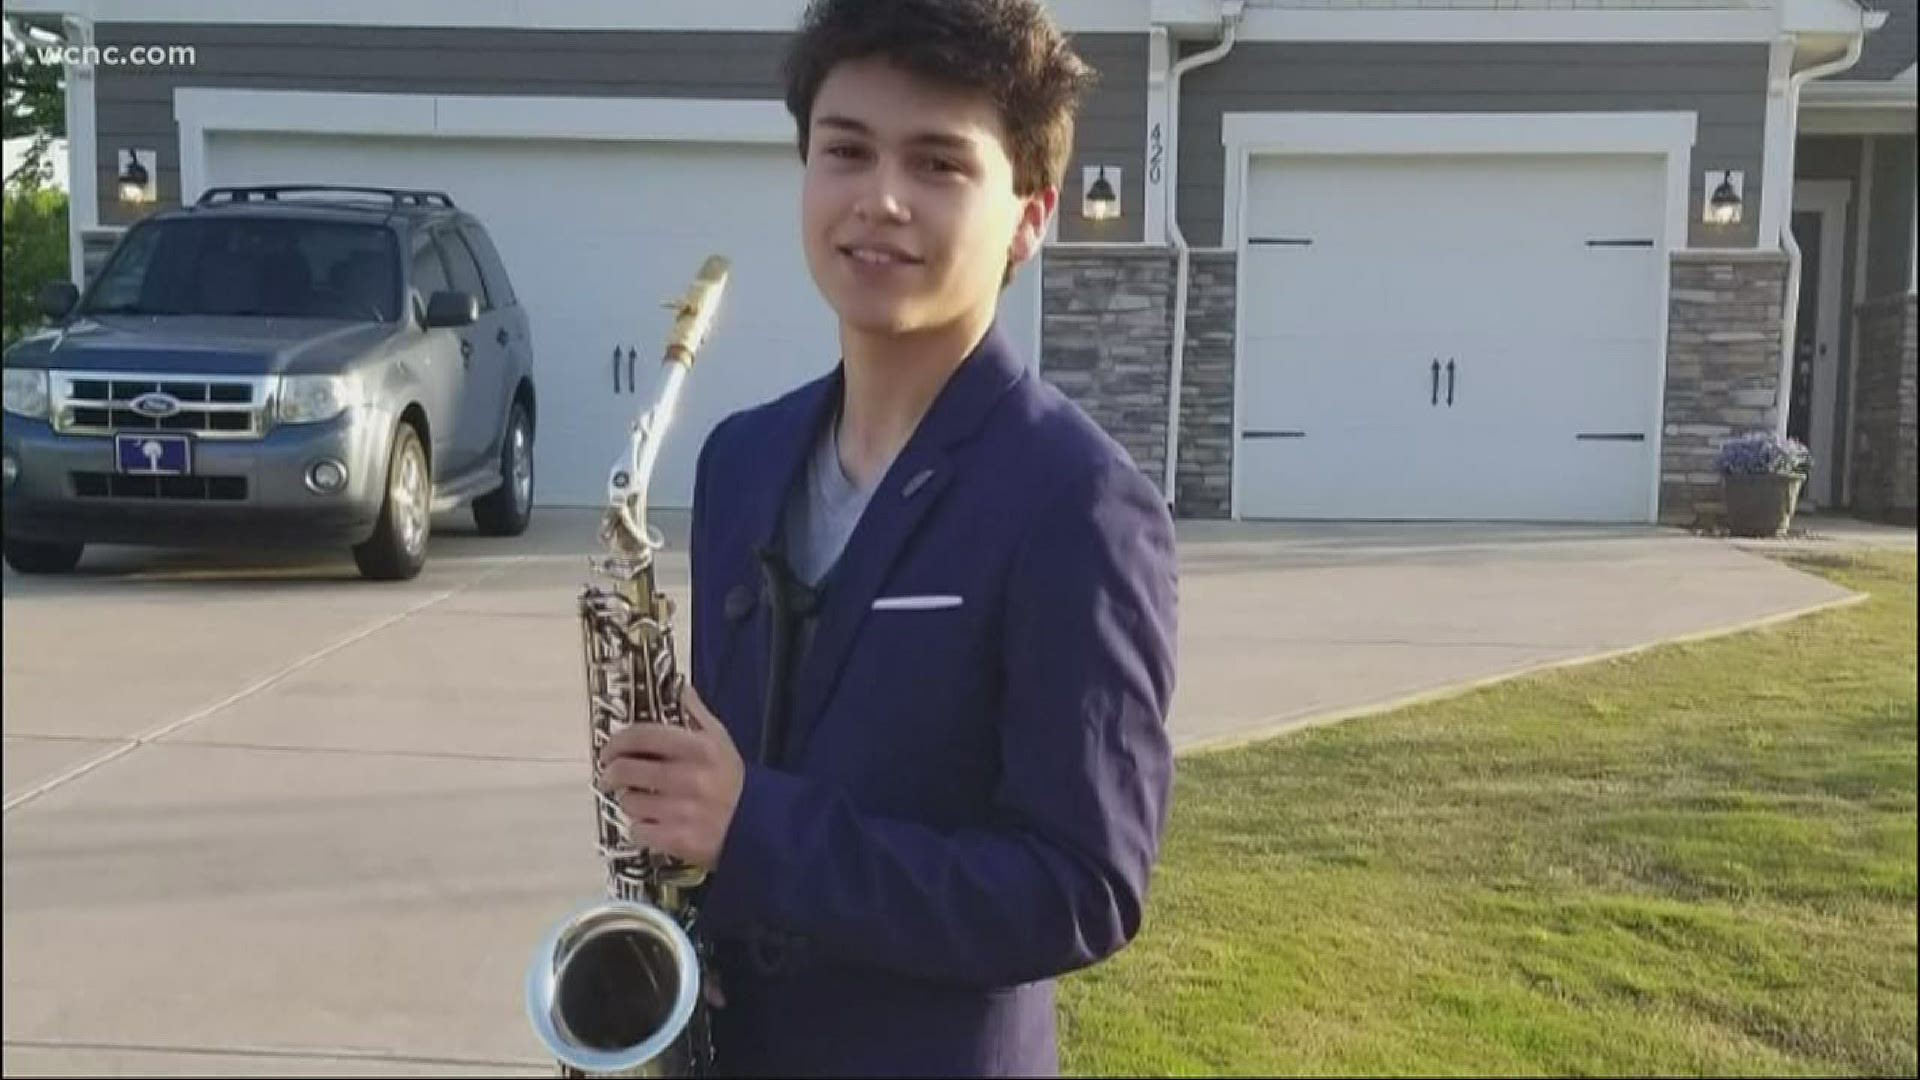 The teen is going to houses and, from a safe distance, playing them music on his saxaphone.